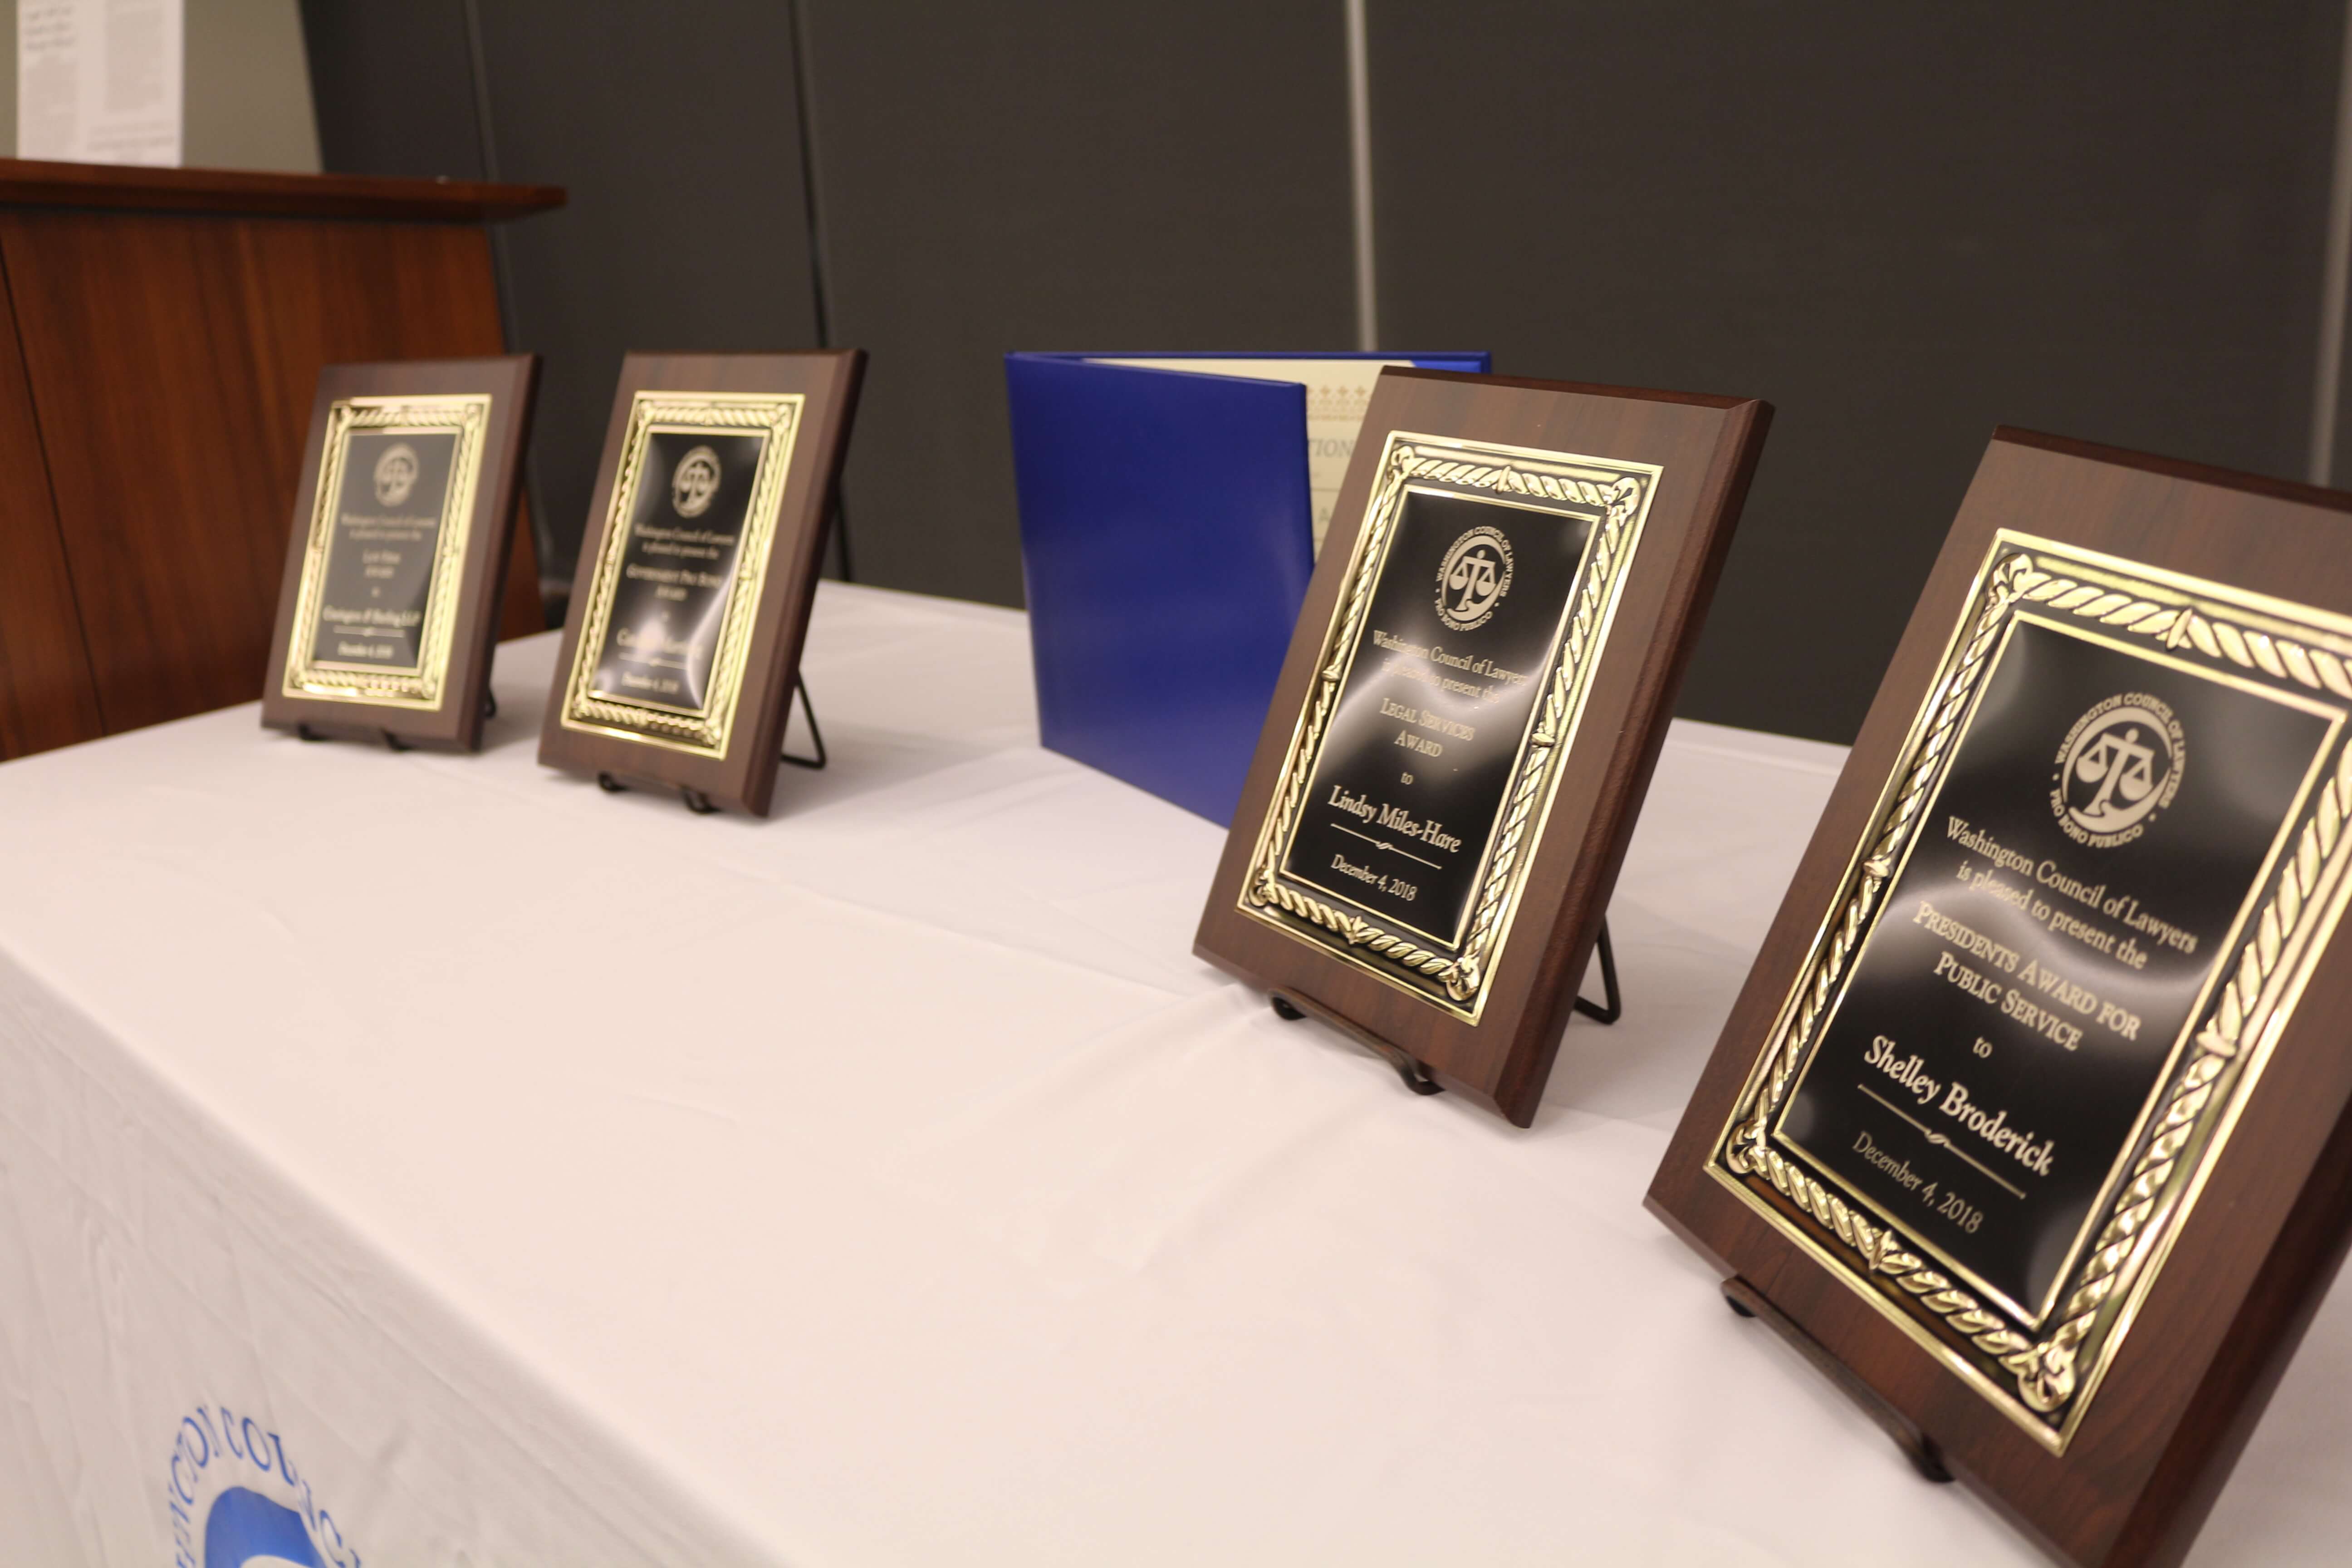 Photo: Award plaques on a table